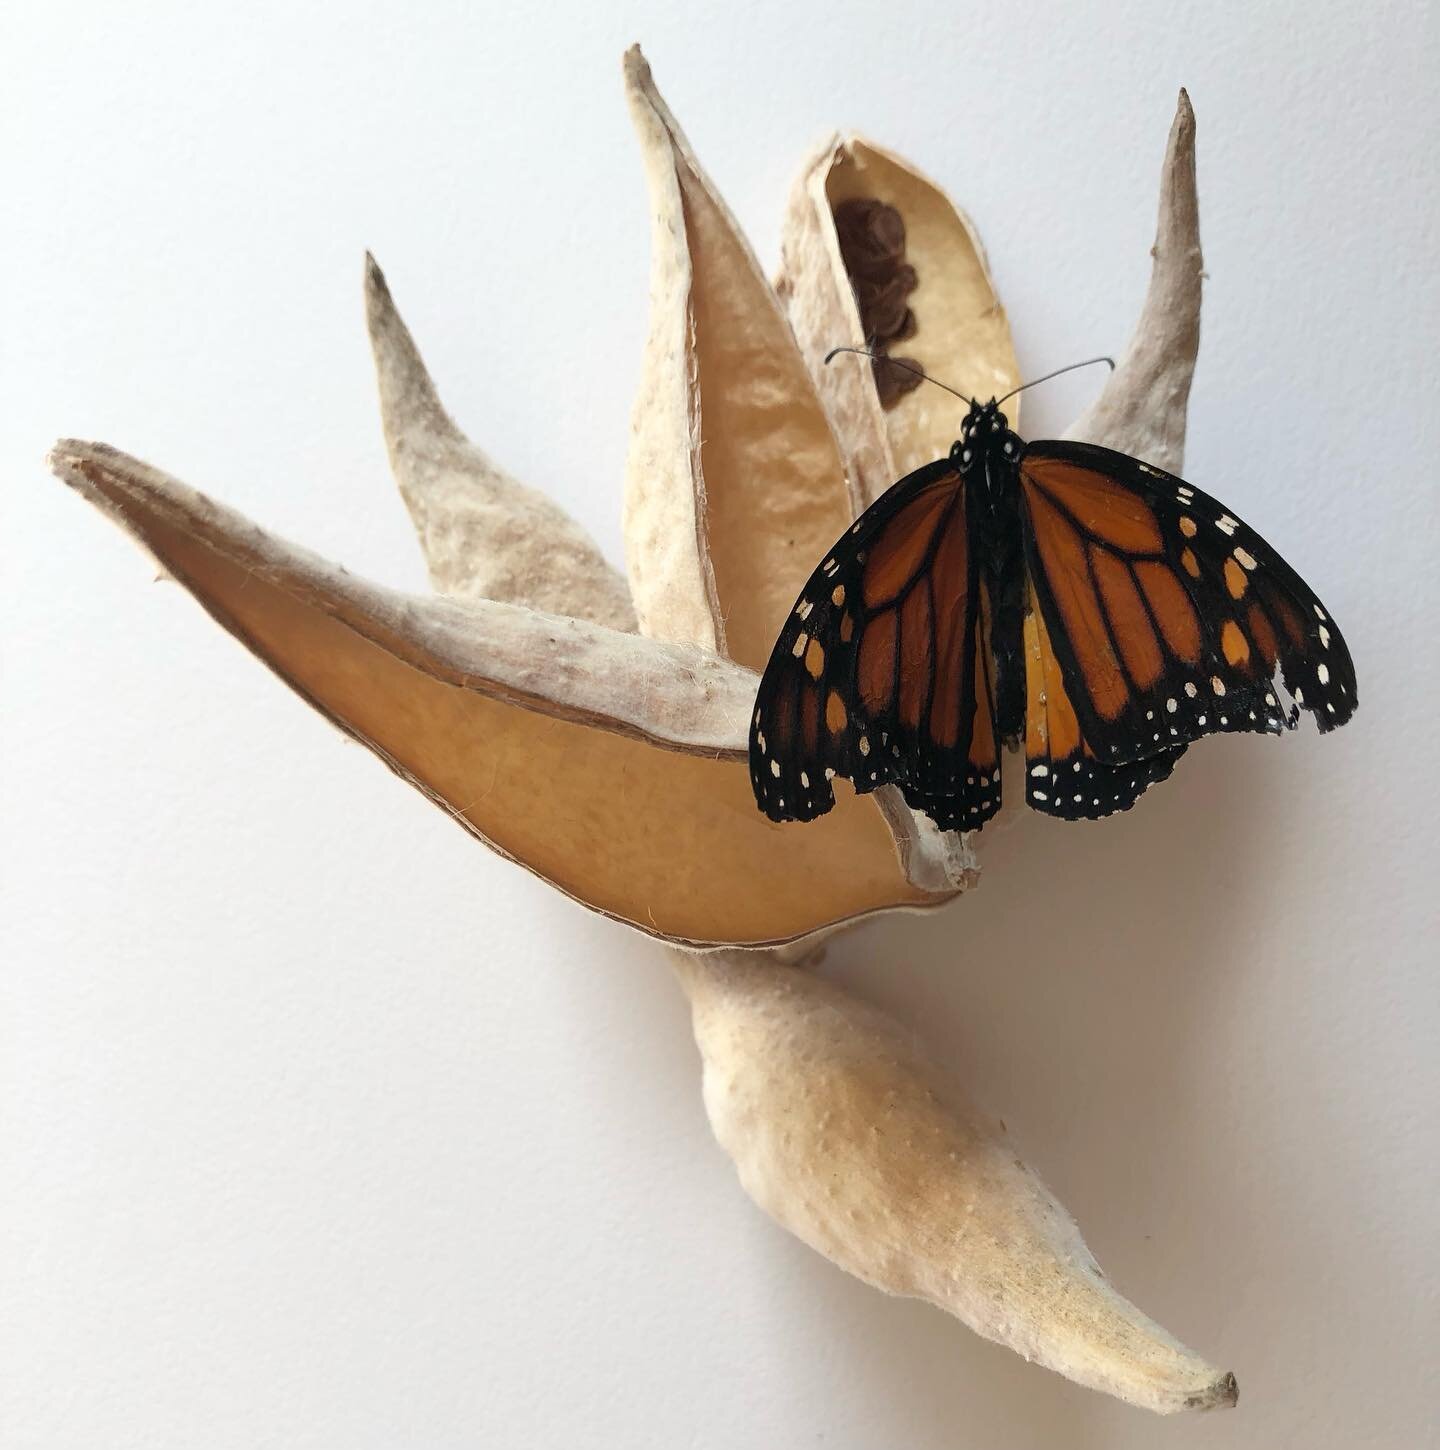 For a while now I have been finding treasures while out on my runs. I found these milkweed seedpods a little over a month ago and just yesterday found this gorgeous male monarch on the side of the road&hellip;he had already passed on when I found him